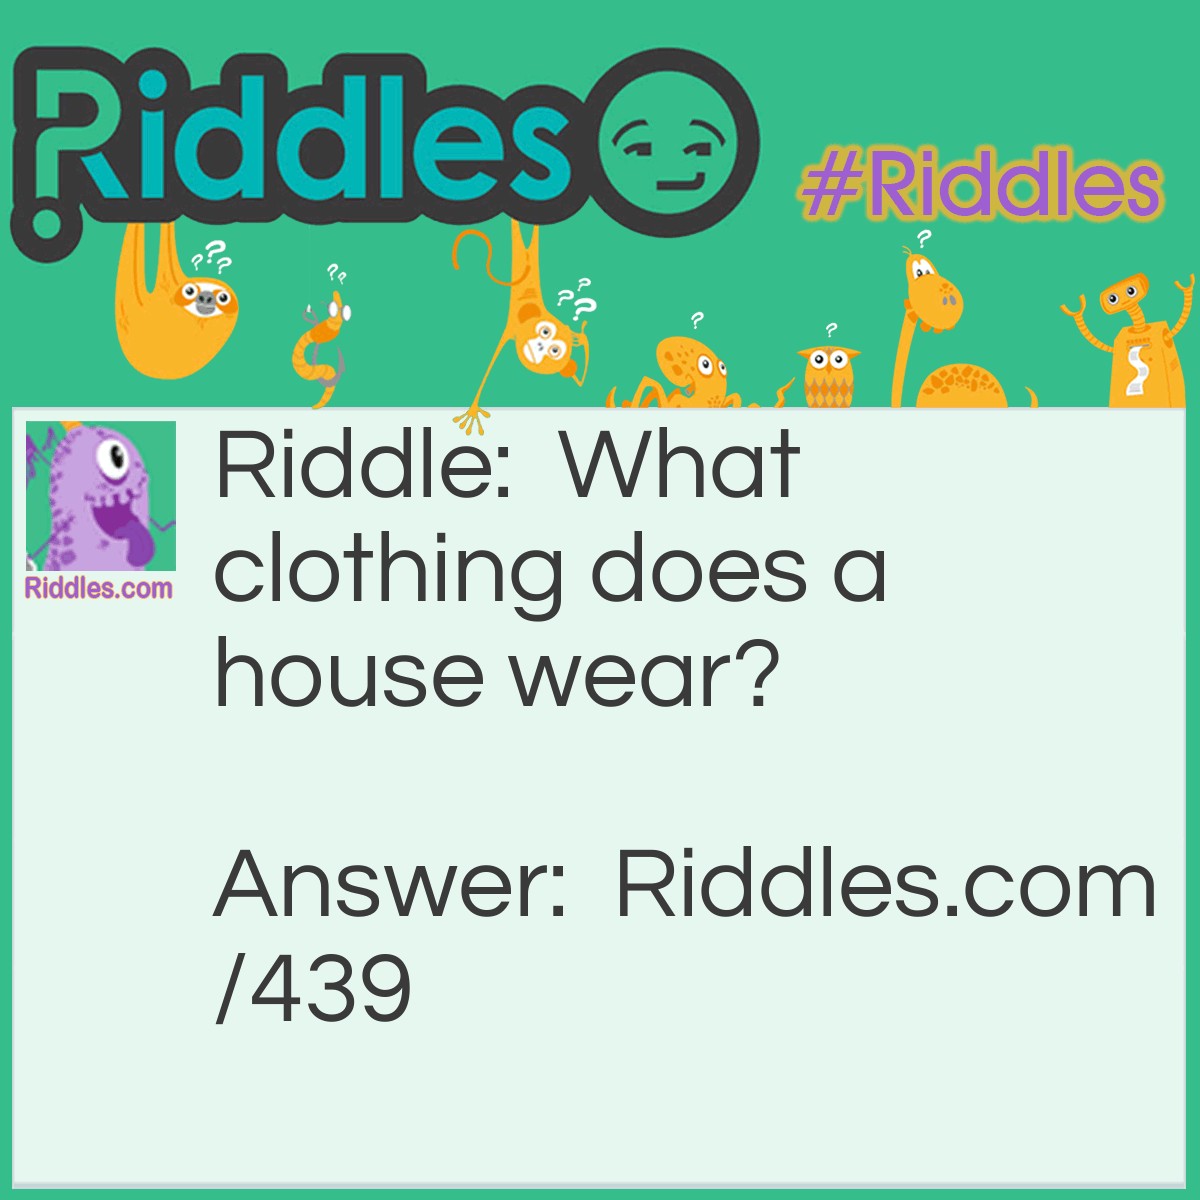 Riddle: What clothing does a house wear? Answer: A dress. Address, get it?